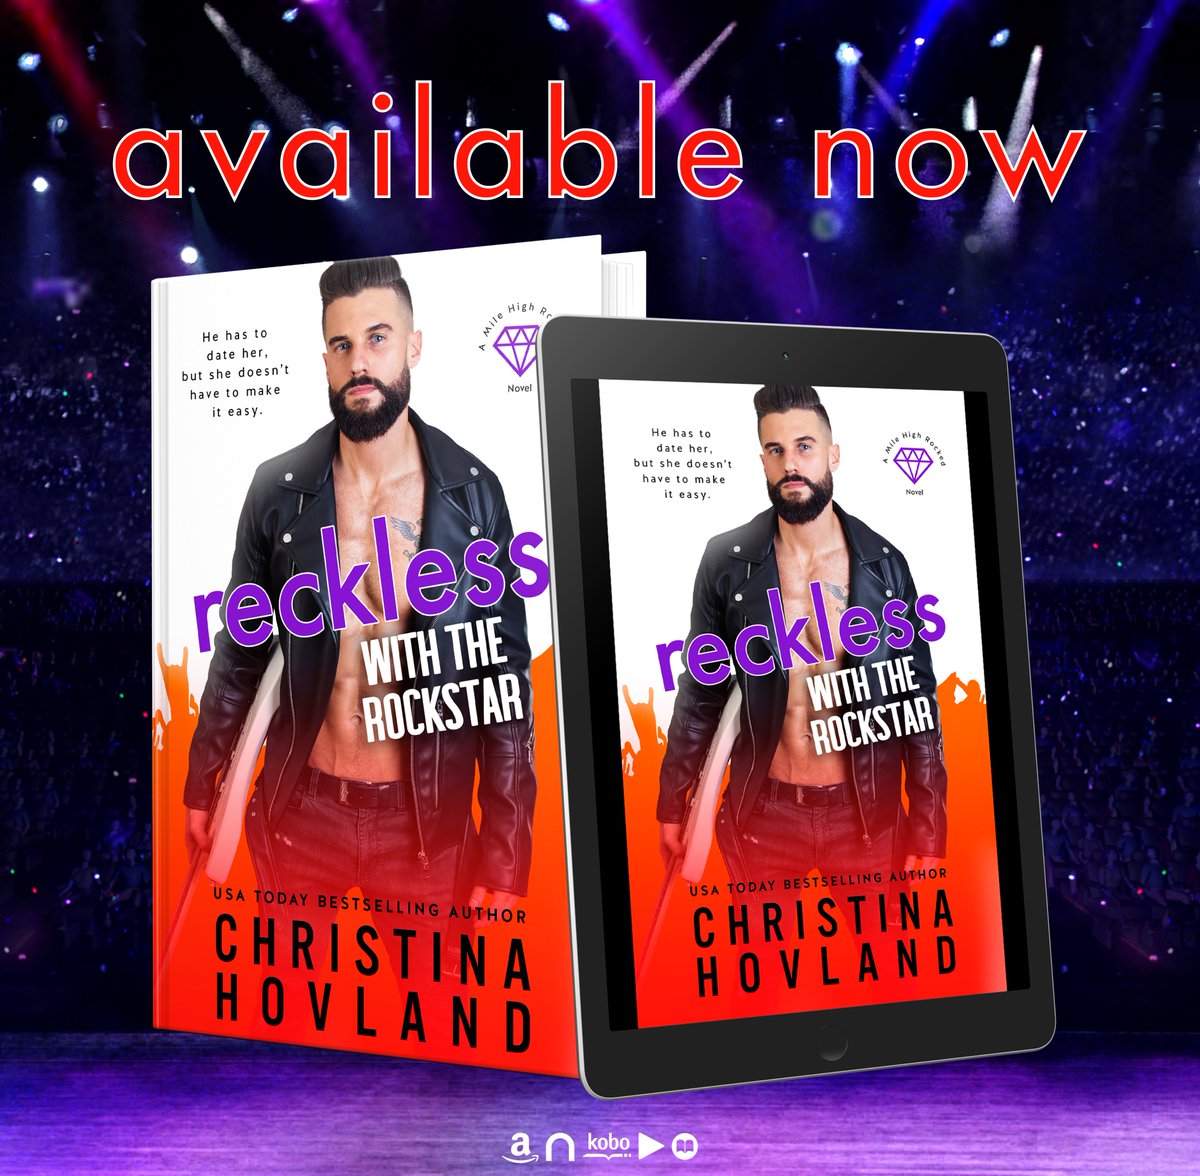 🎶 NEW RELEASE 🎶

RECKLESS WITH THE ROCKSTAR, by USA Today bestselling author @HovlandWrites

books2read.com/recklessrockst…

#NewRelease #RecklessWithTheRockstar #ChristinaHovland #RockstarRomance #OppositesAttract #FishOutOfWater #RomCom #wordsmithpublicity @wordsmithpublic